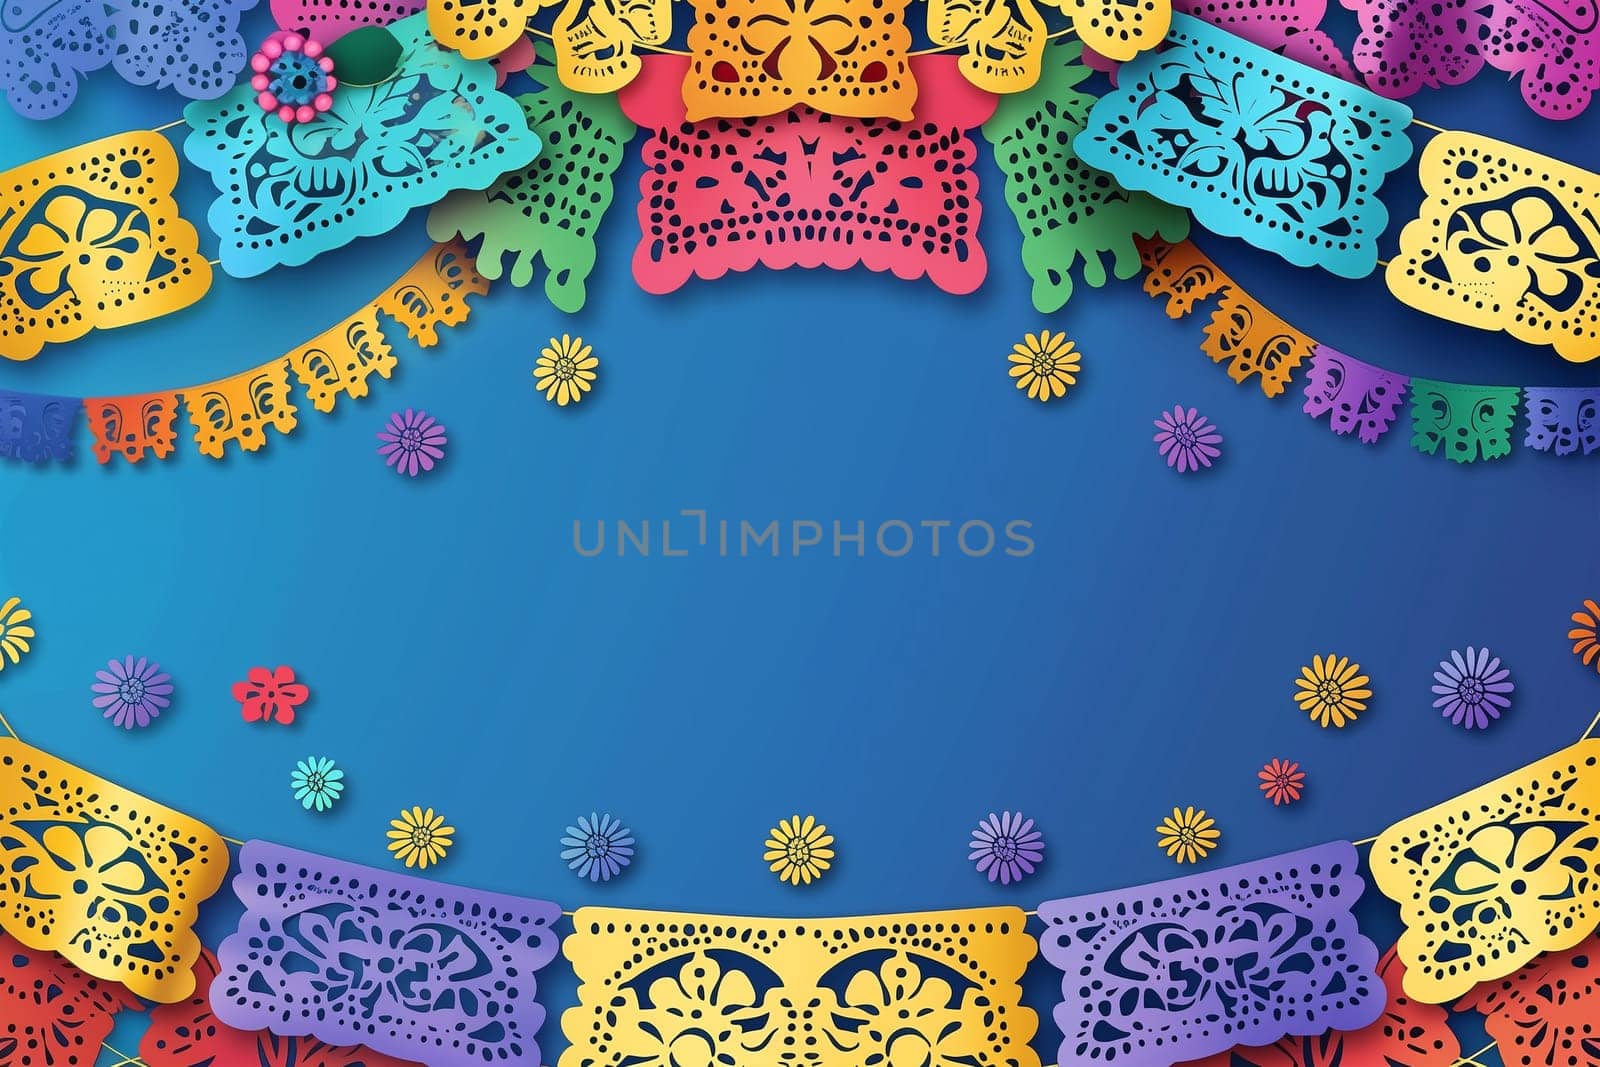 Colorful Background With Paper Cutouts and Flowers by Sd28DimoN_1976